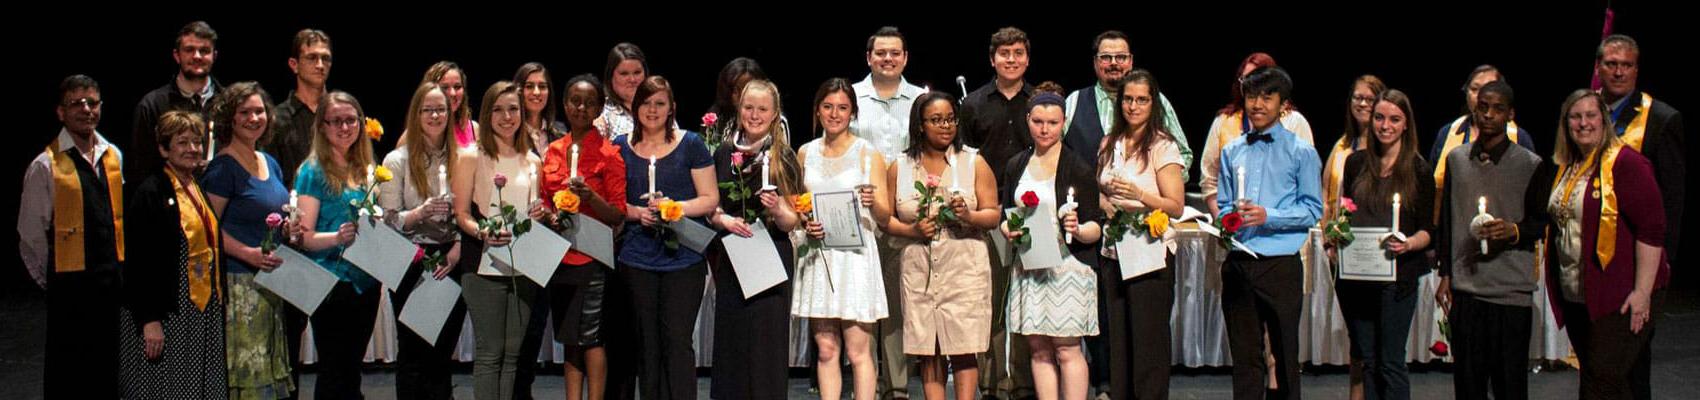 PTK students on stage at awards ceremony